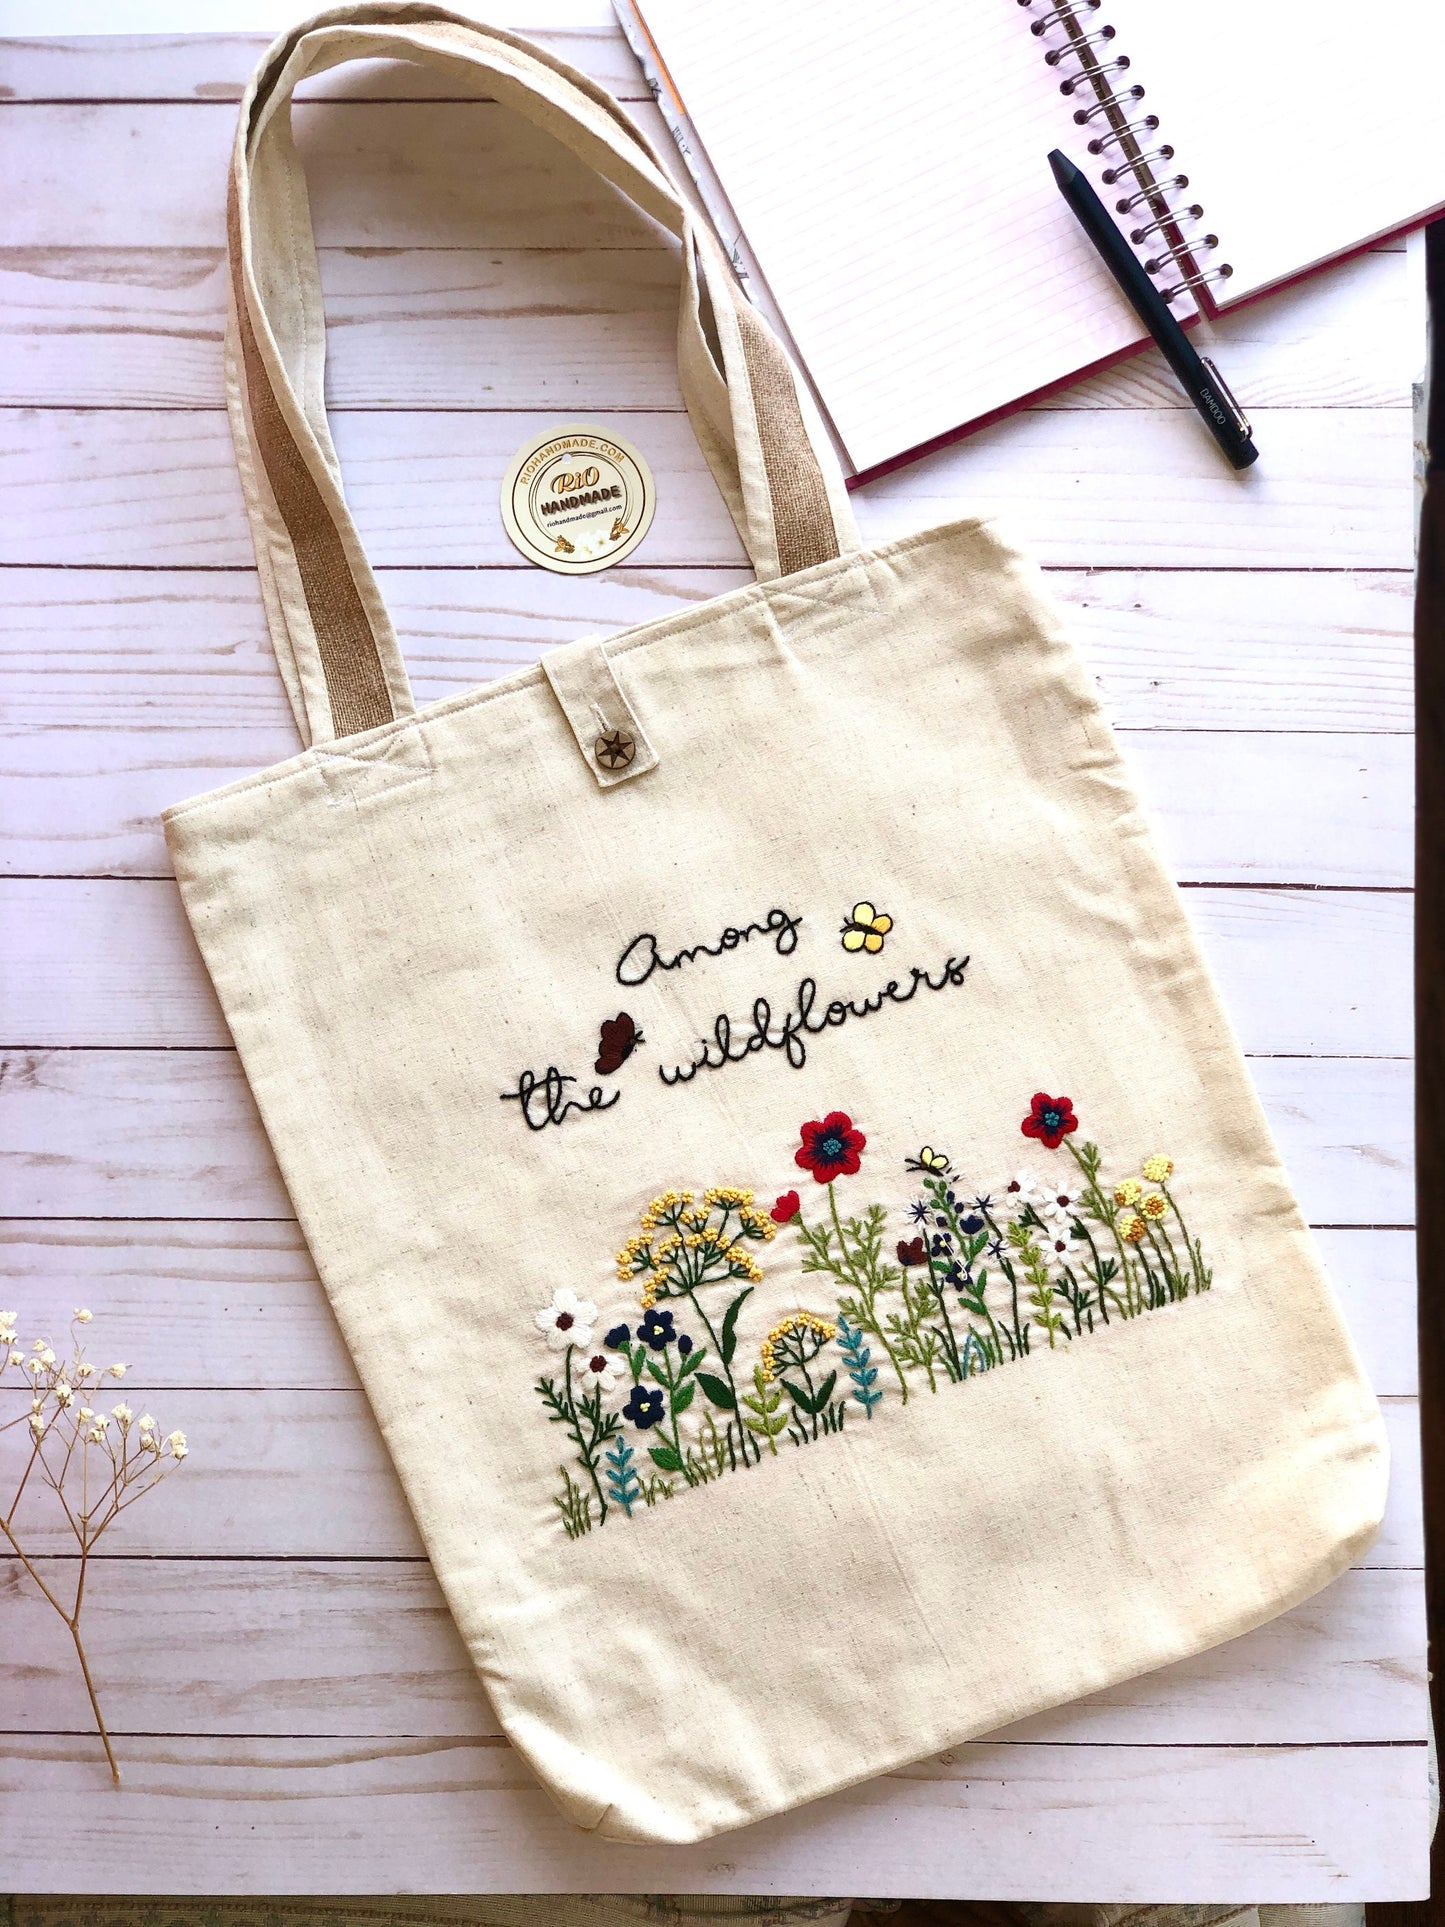 Handmade Linen Embroidery Among WildFlowers, Floral Tote Bag